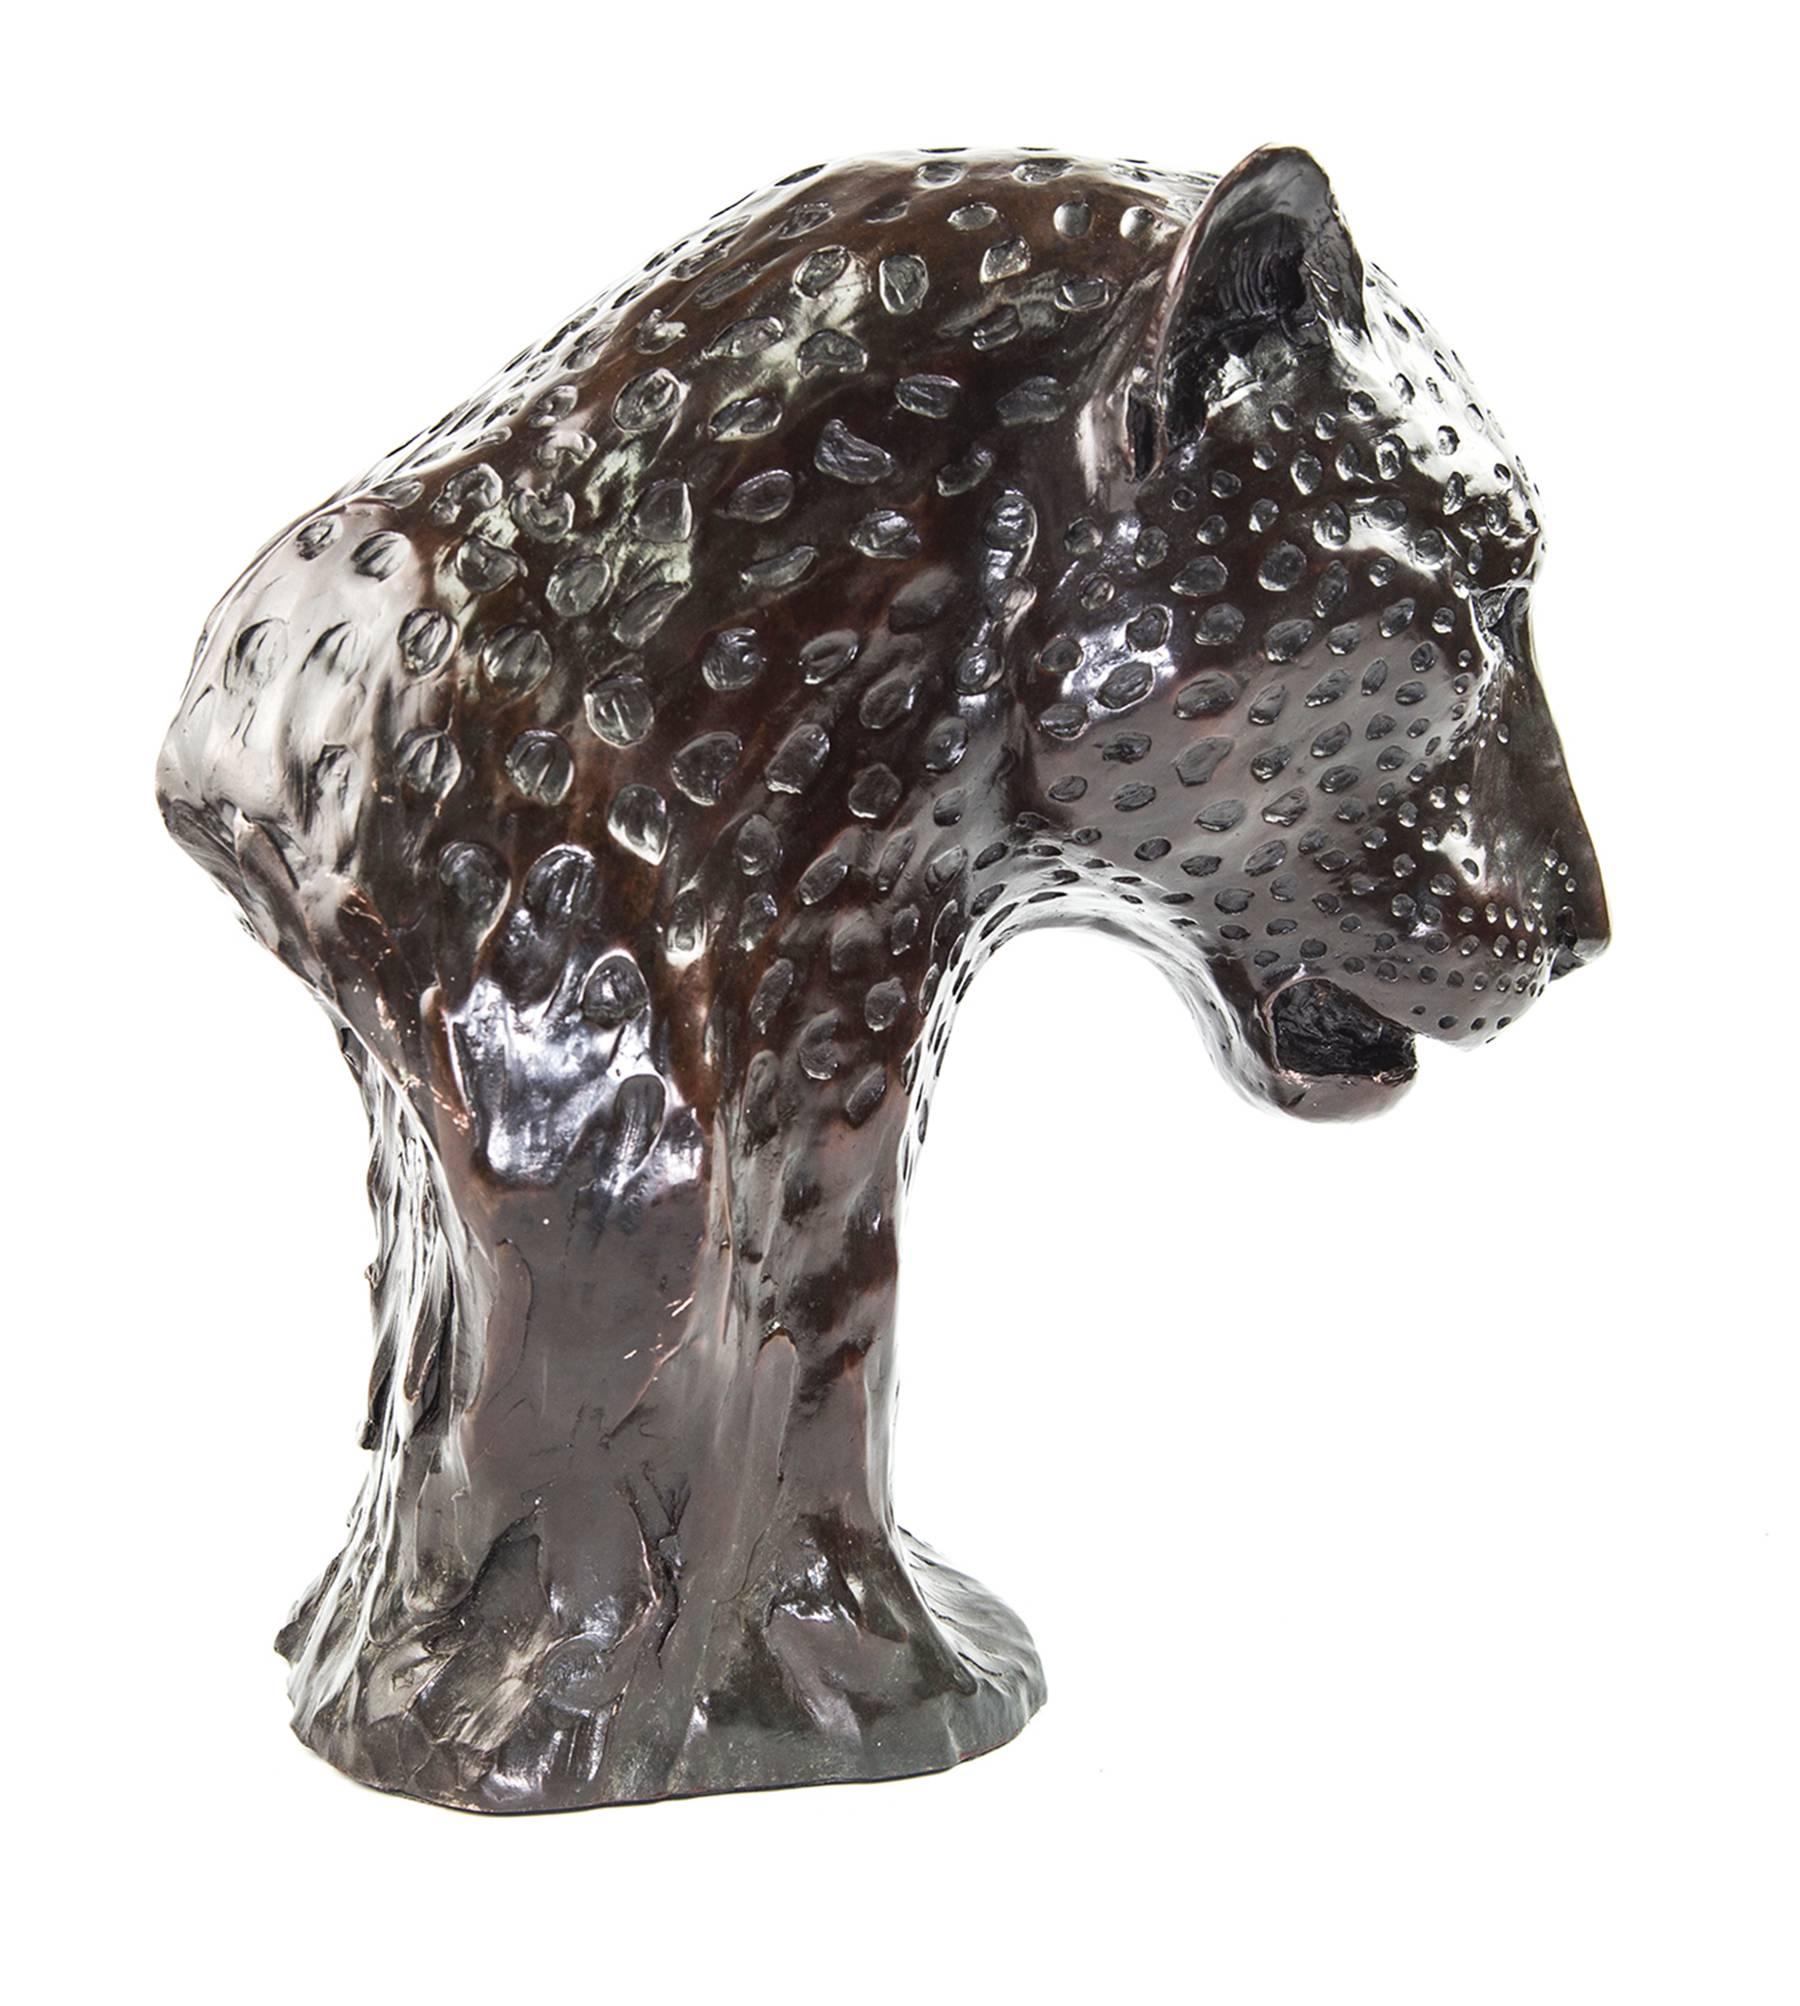 Fabulous bronze leopard head sculpture by Donald Greig, renowned South African sculptor, with a passion and deep appreciation for the bush and Africa's beautiful wildlife. Limited Edition 2 of 200 13.5” high x 7.5” wide x 13” deep.
      